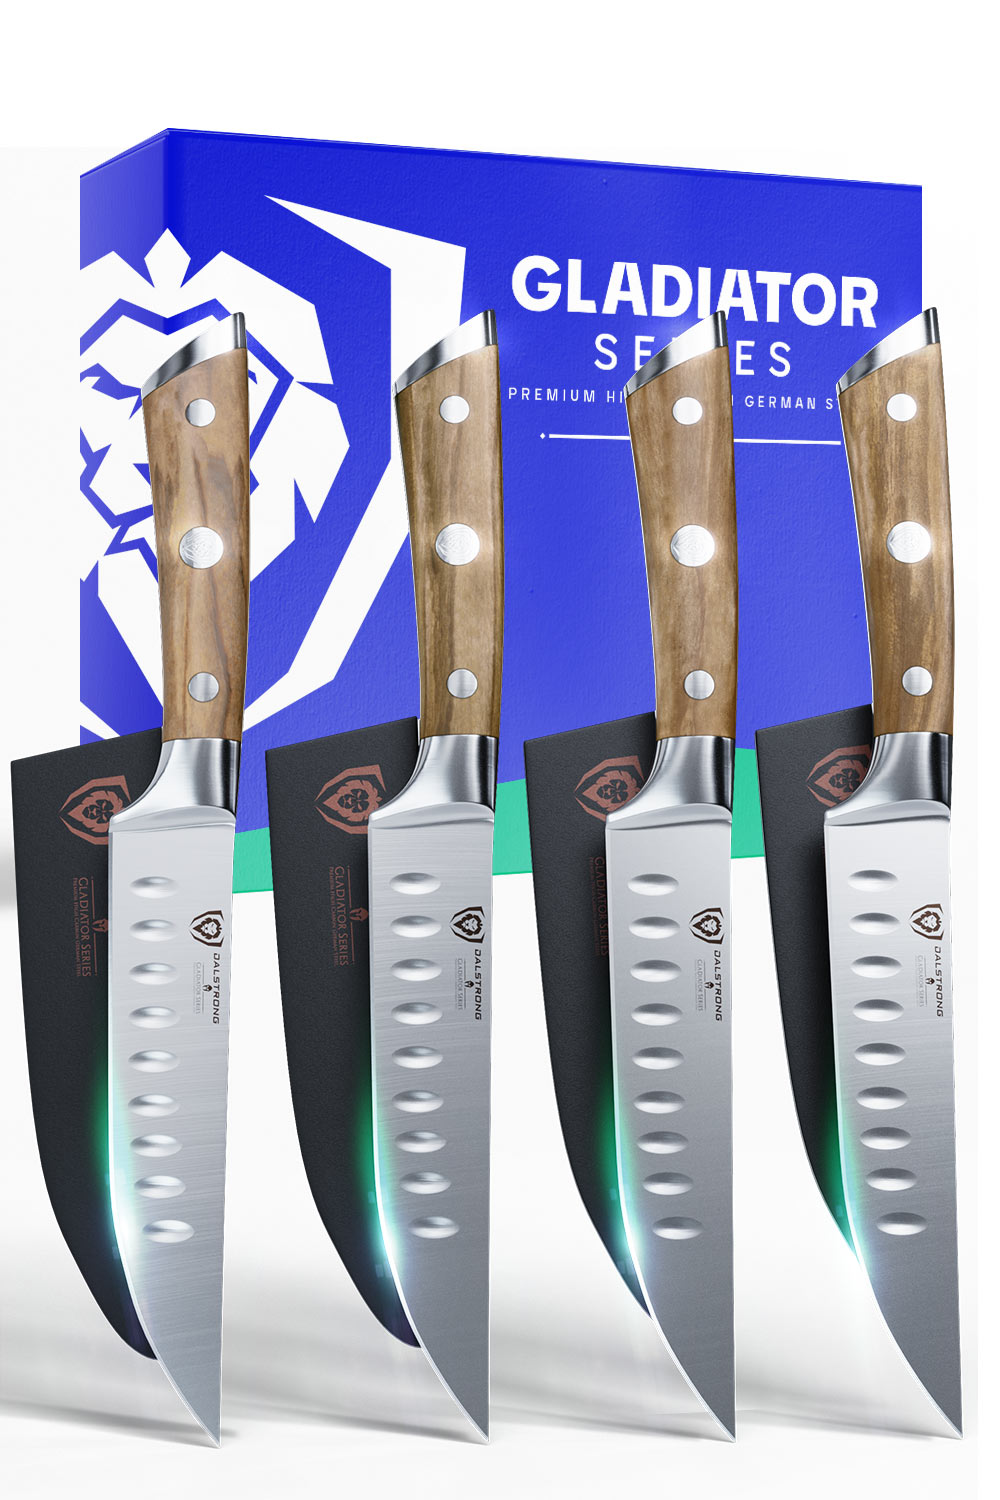 Dalstrong gladiator series 4 piece steak knife set with olive wood handle in front of it's premium packaging.